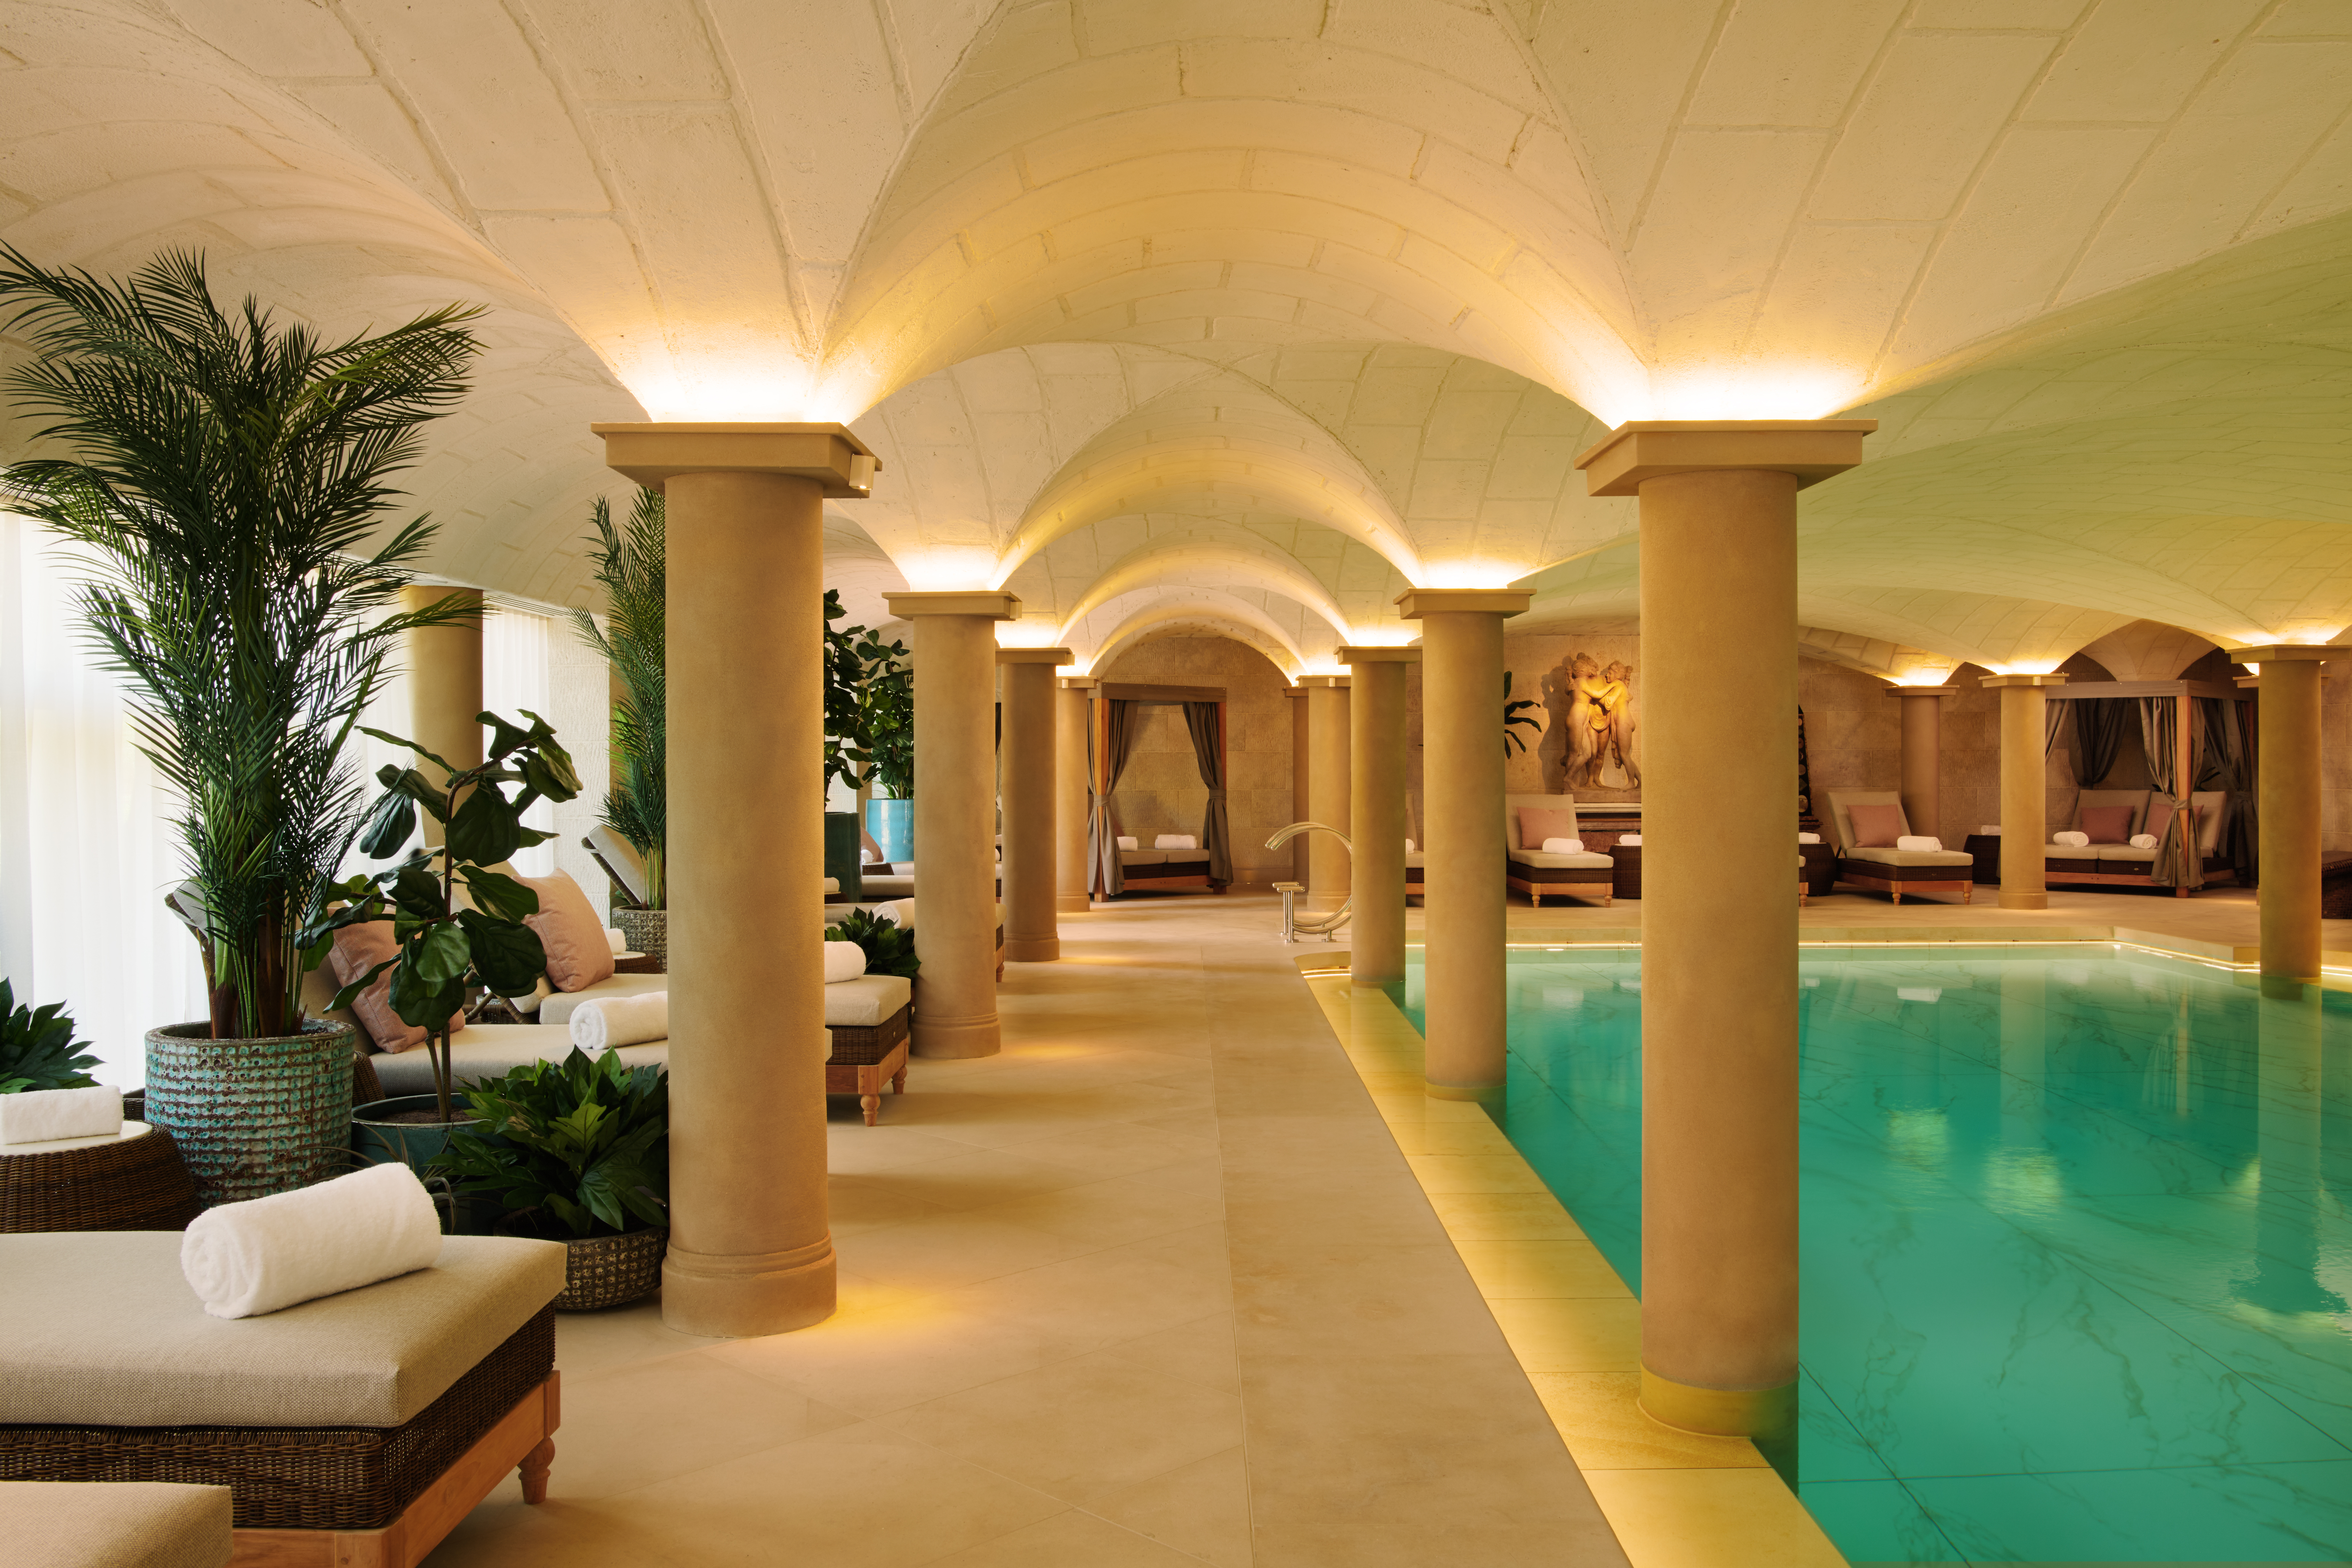 Swimming pool at Grantley Hall with luxury bespoke flooring and surfaces provided by Lapicida